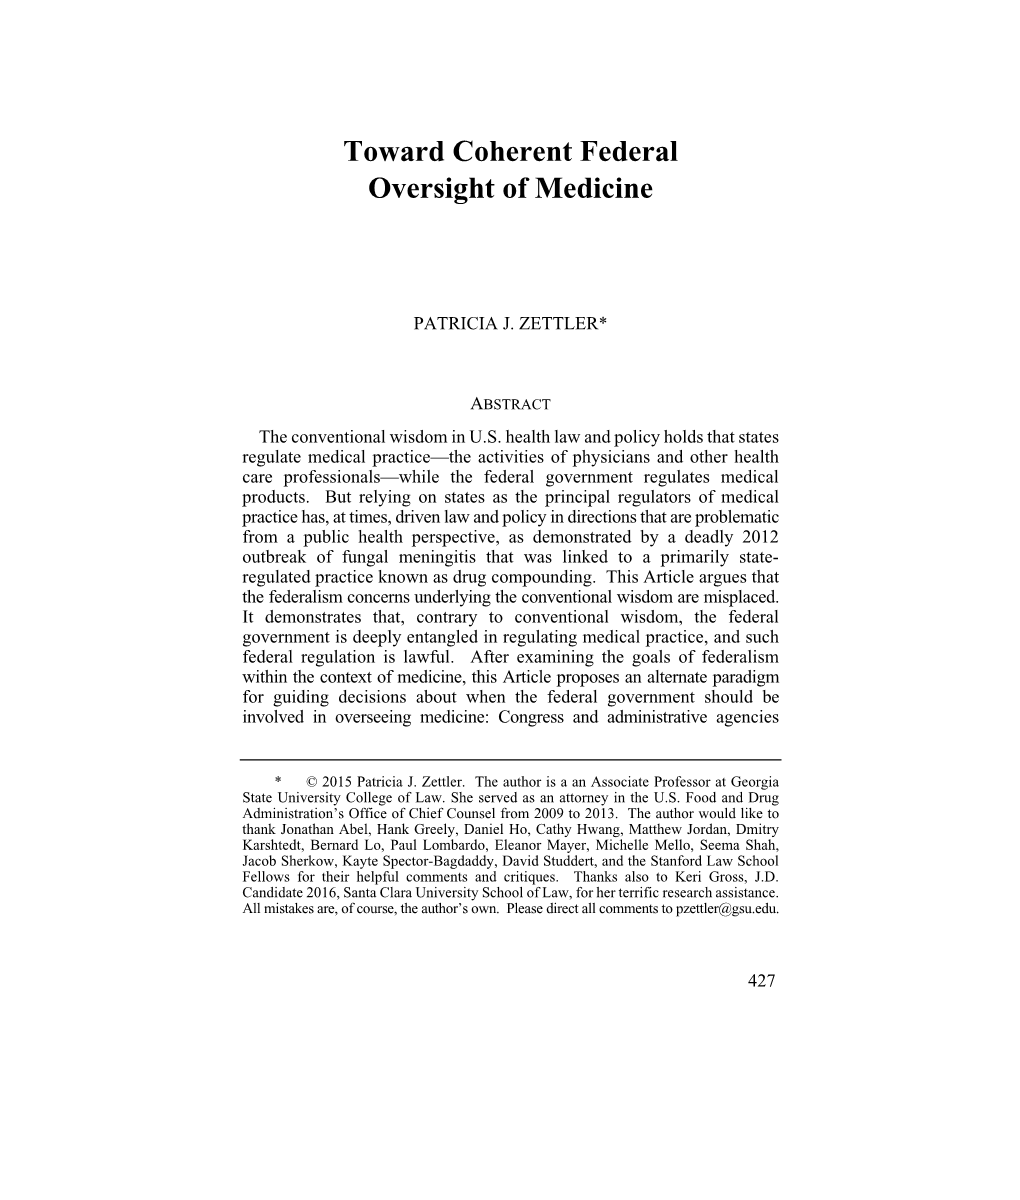 Toward Coherent Federal Oversight of Medicine